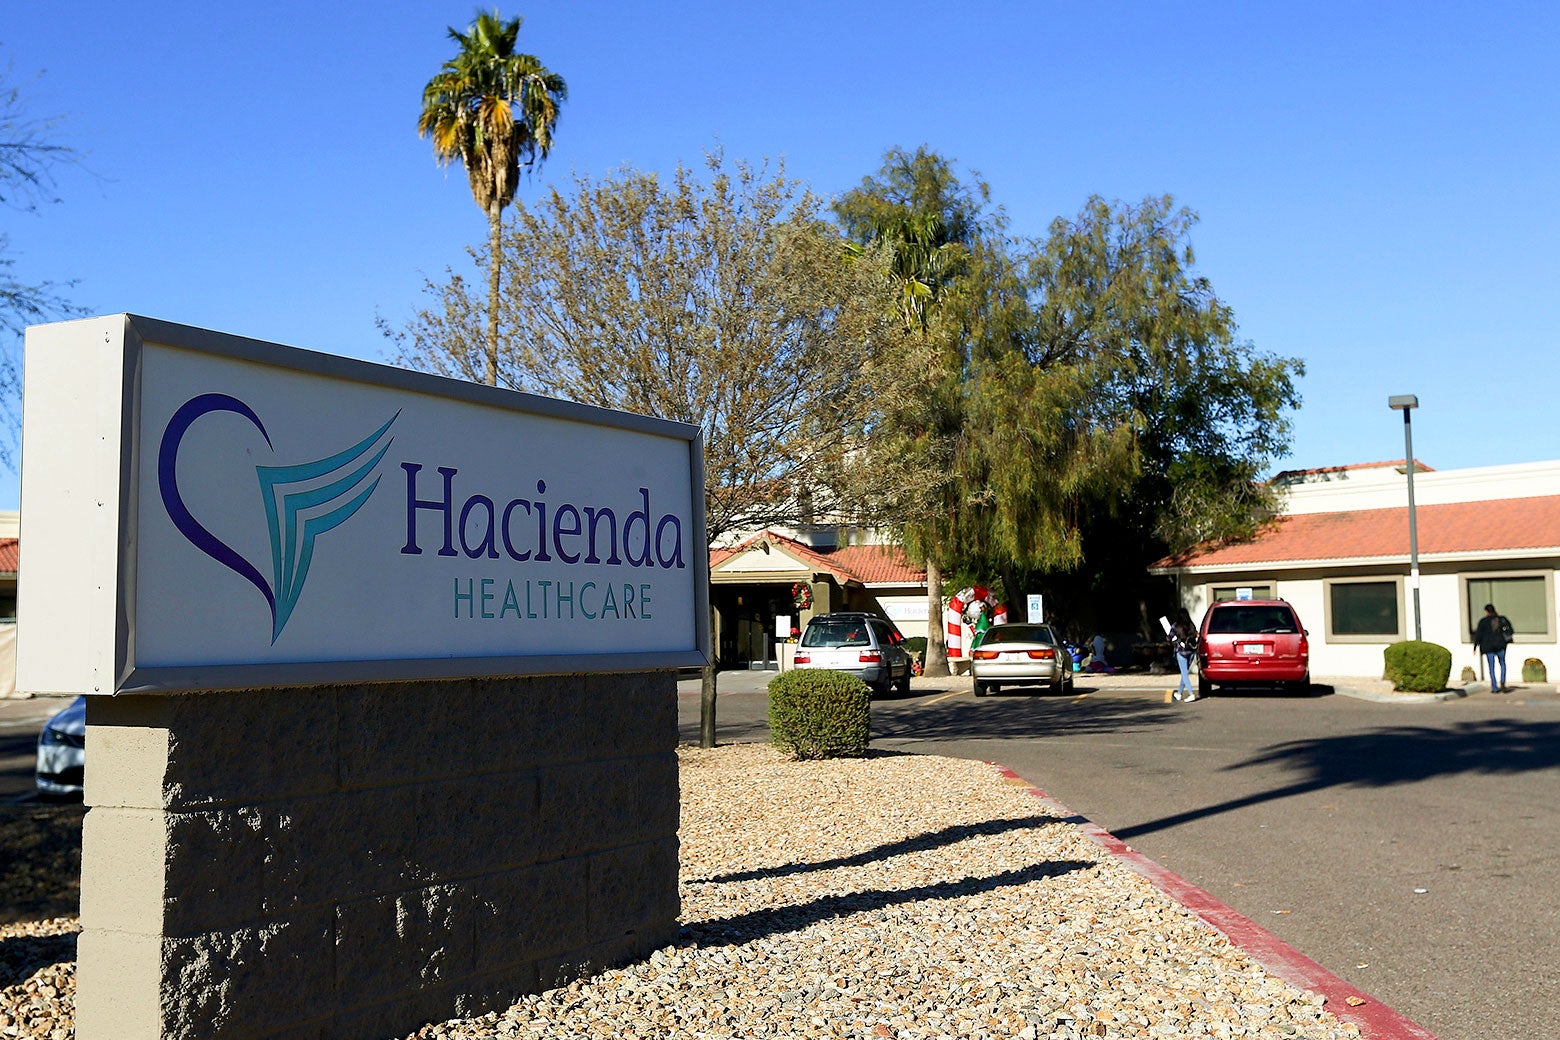 File photo of the Hacienda HealthCare sign and building in Phoenix.